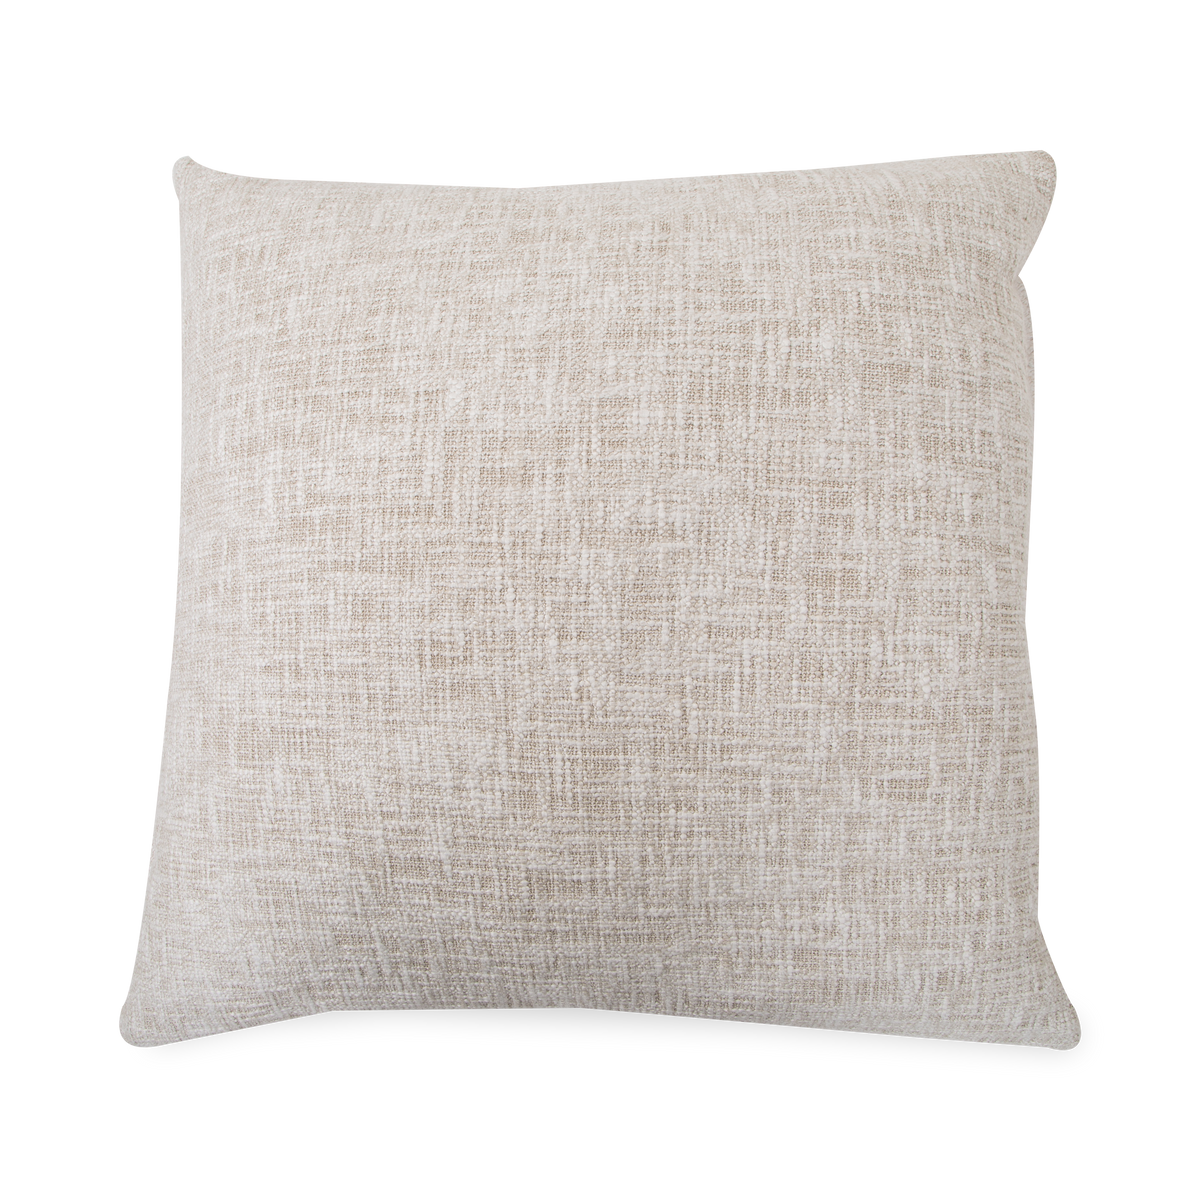 Woven with a design that creates textural magnificence, the Nubby Pillow will add character and depth to any space.